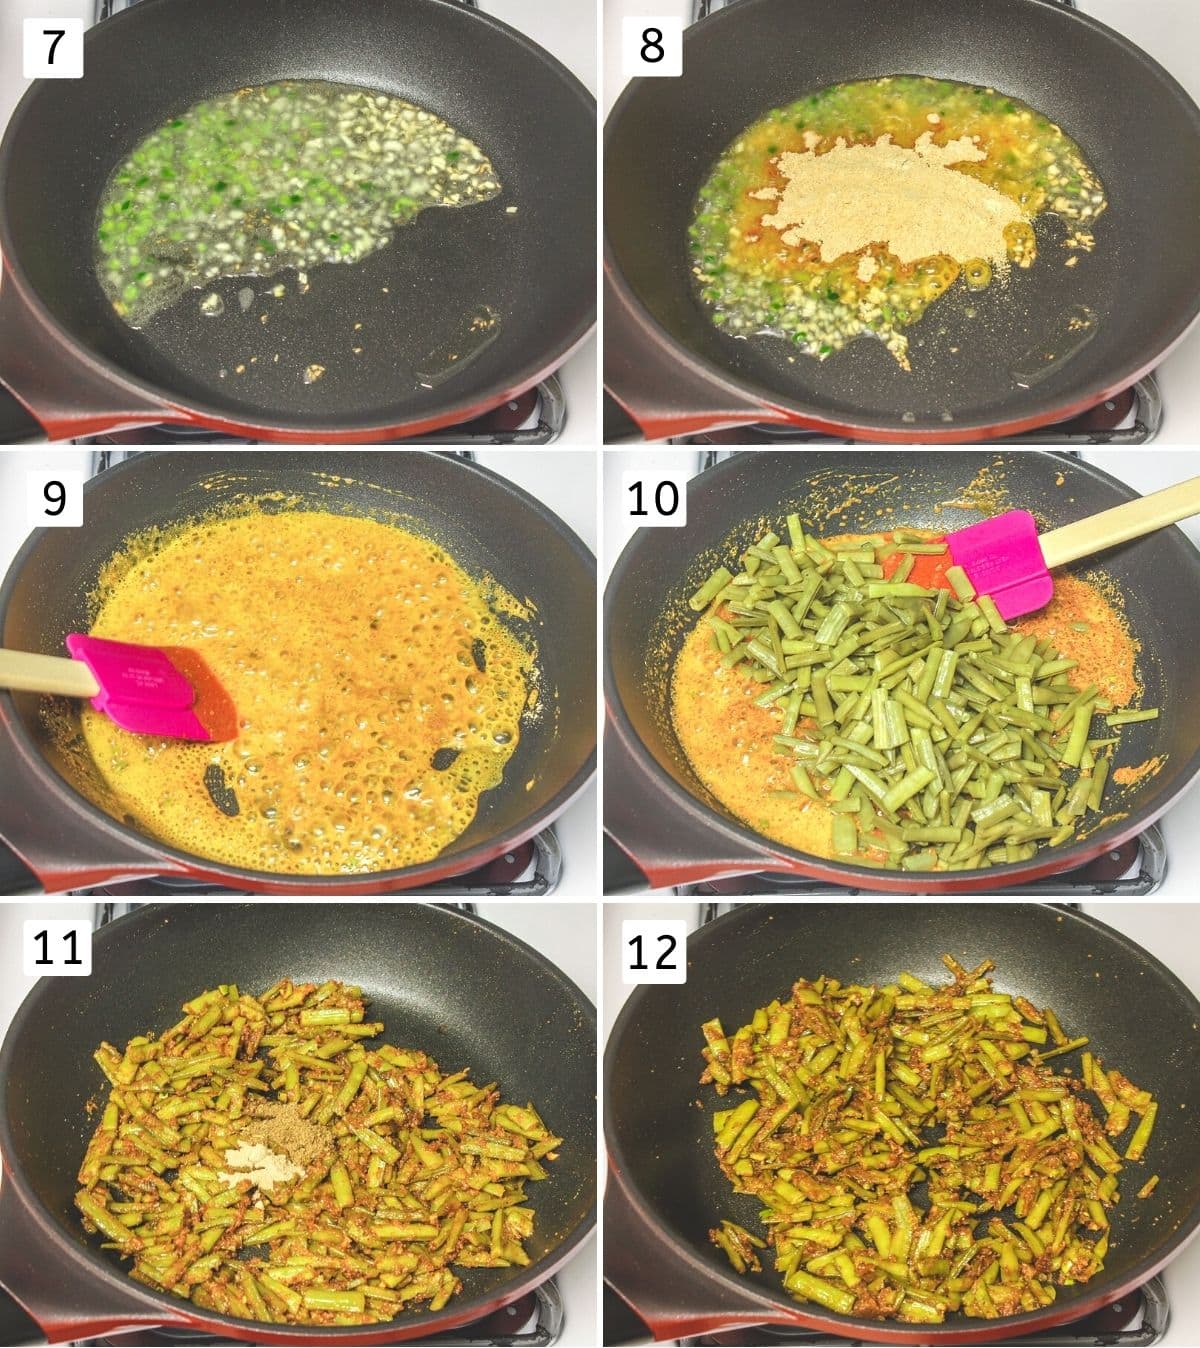 Collage of 6 images showing making tempering, adding besan-spices, steamed beans and mixing.